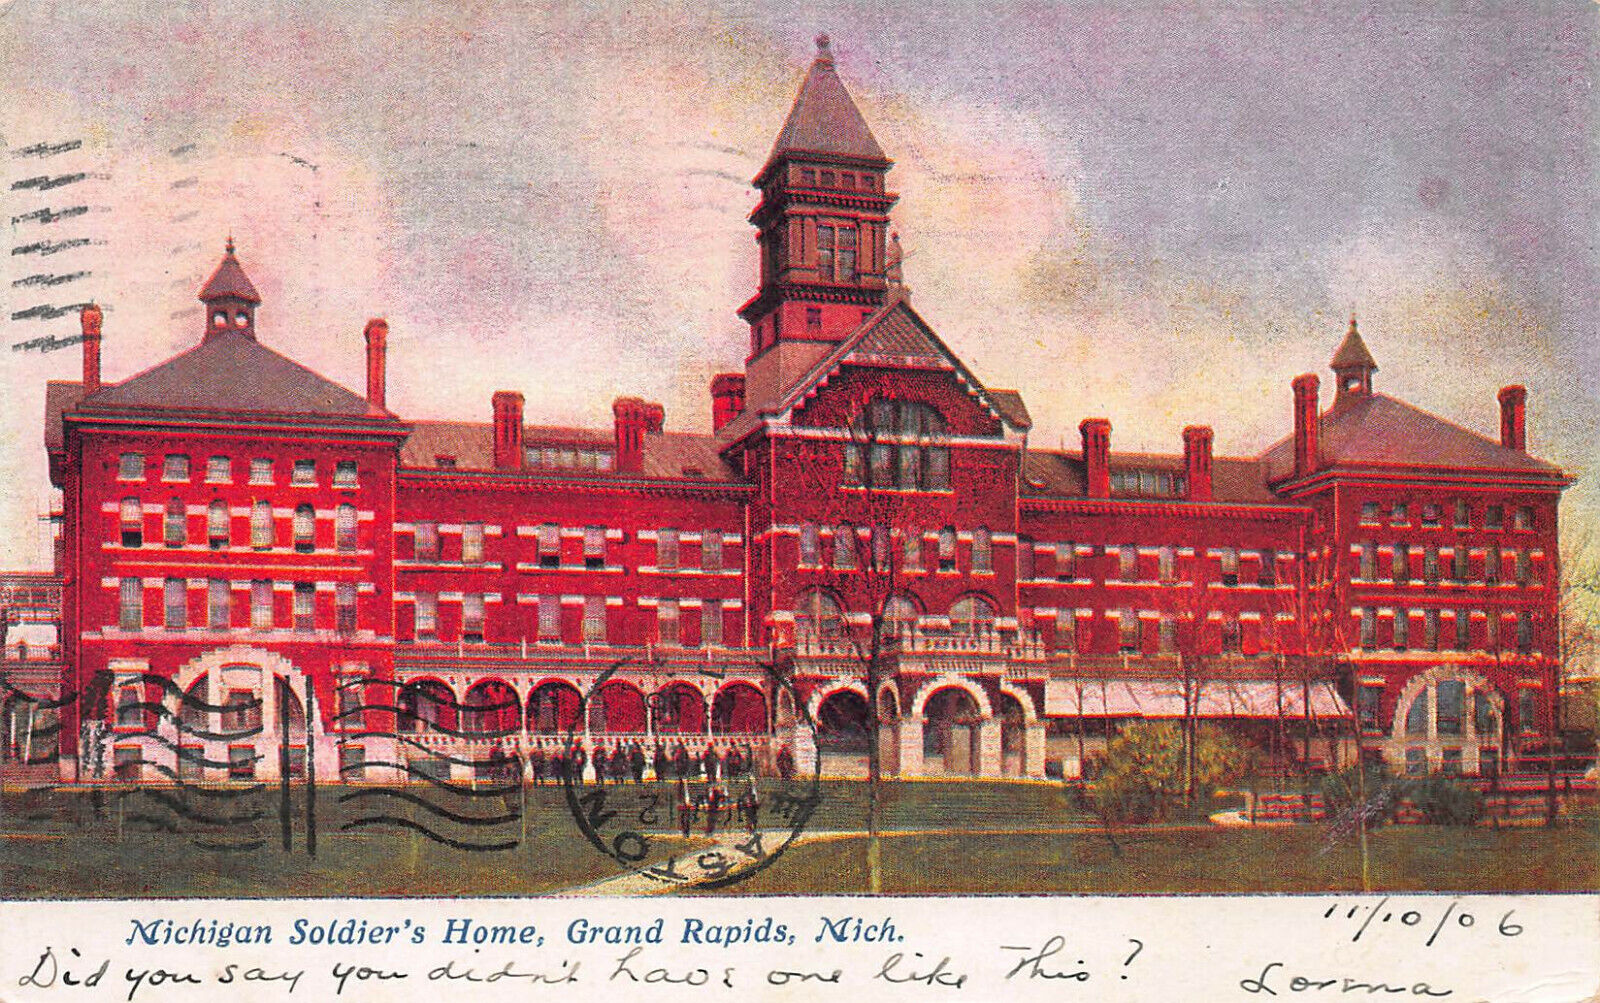 Michigan Soldier's Home, Grand Rapids, Michigan, Early Postcard, Used in 1905